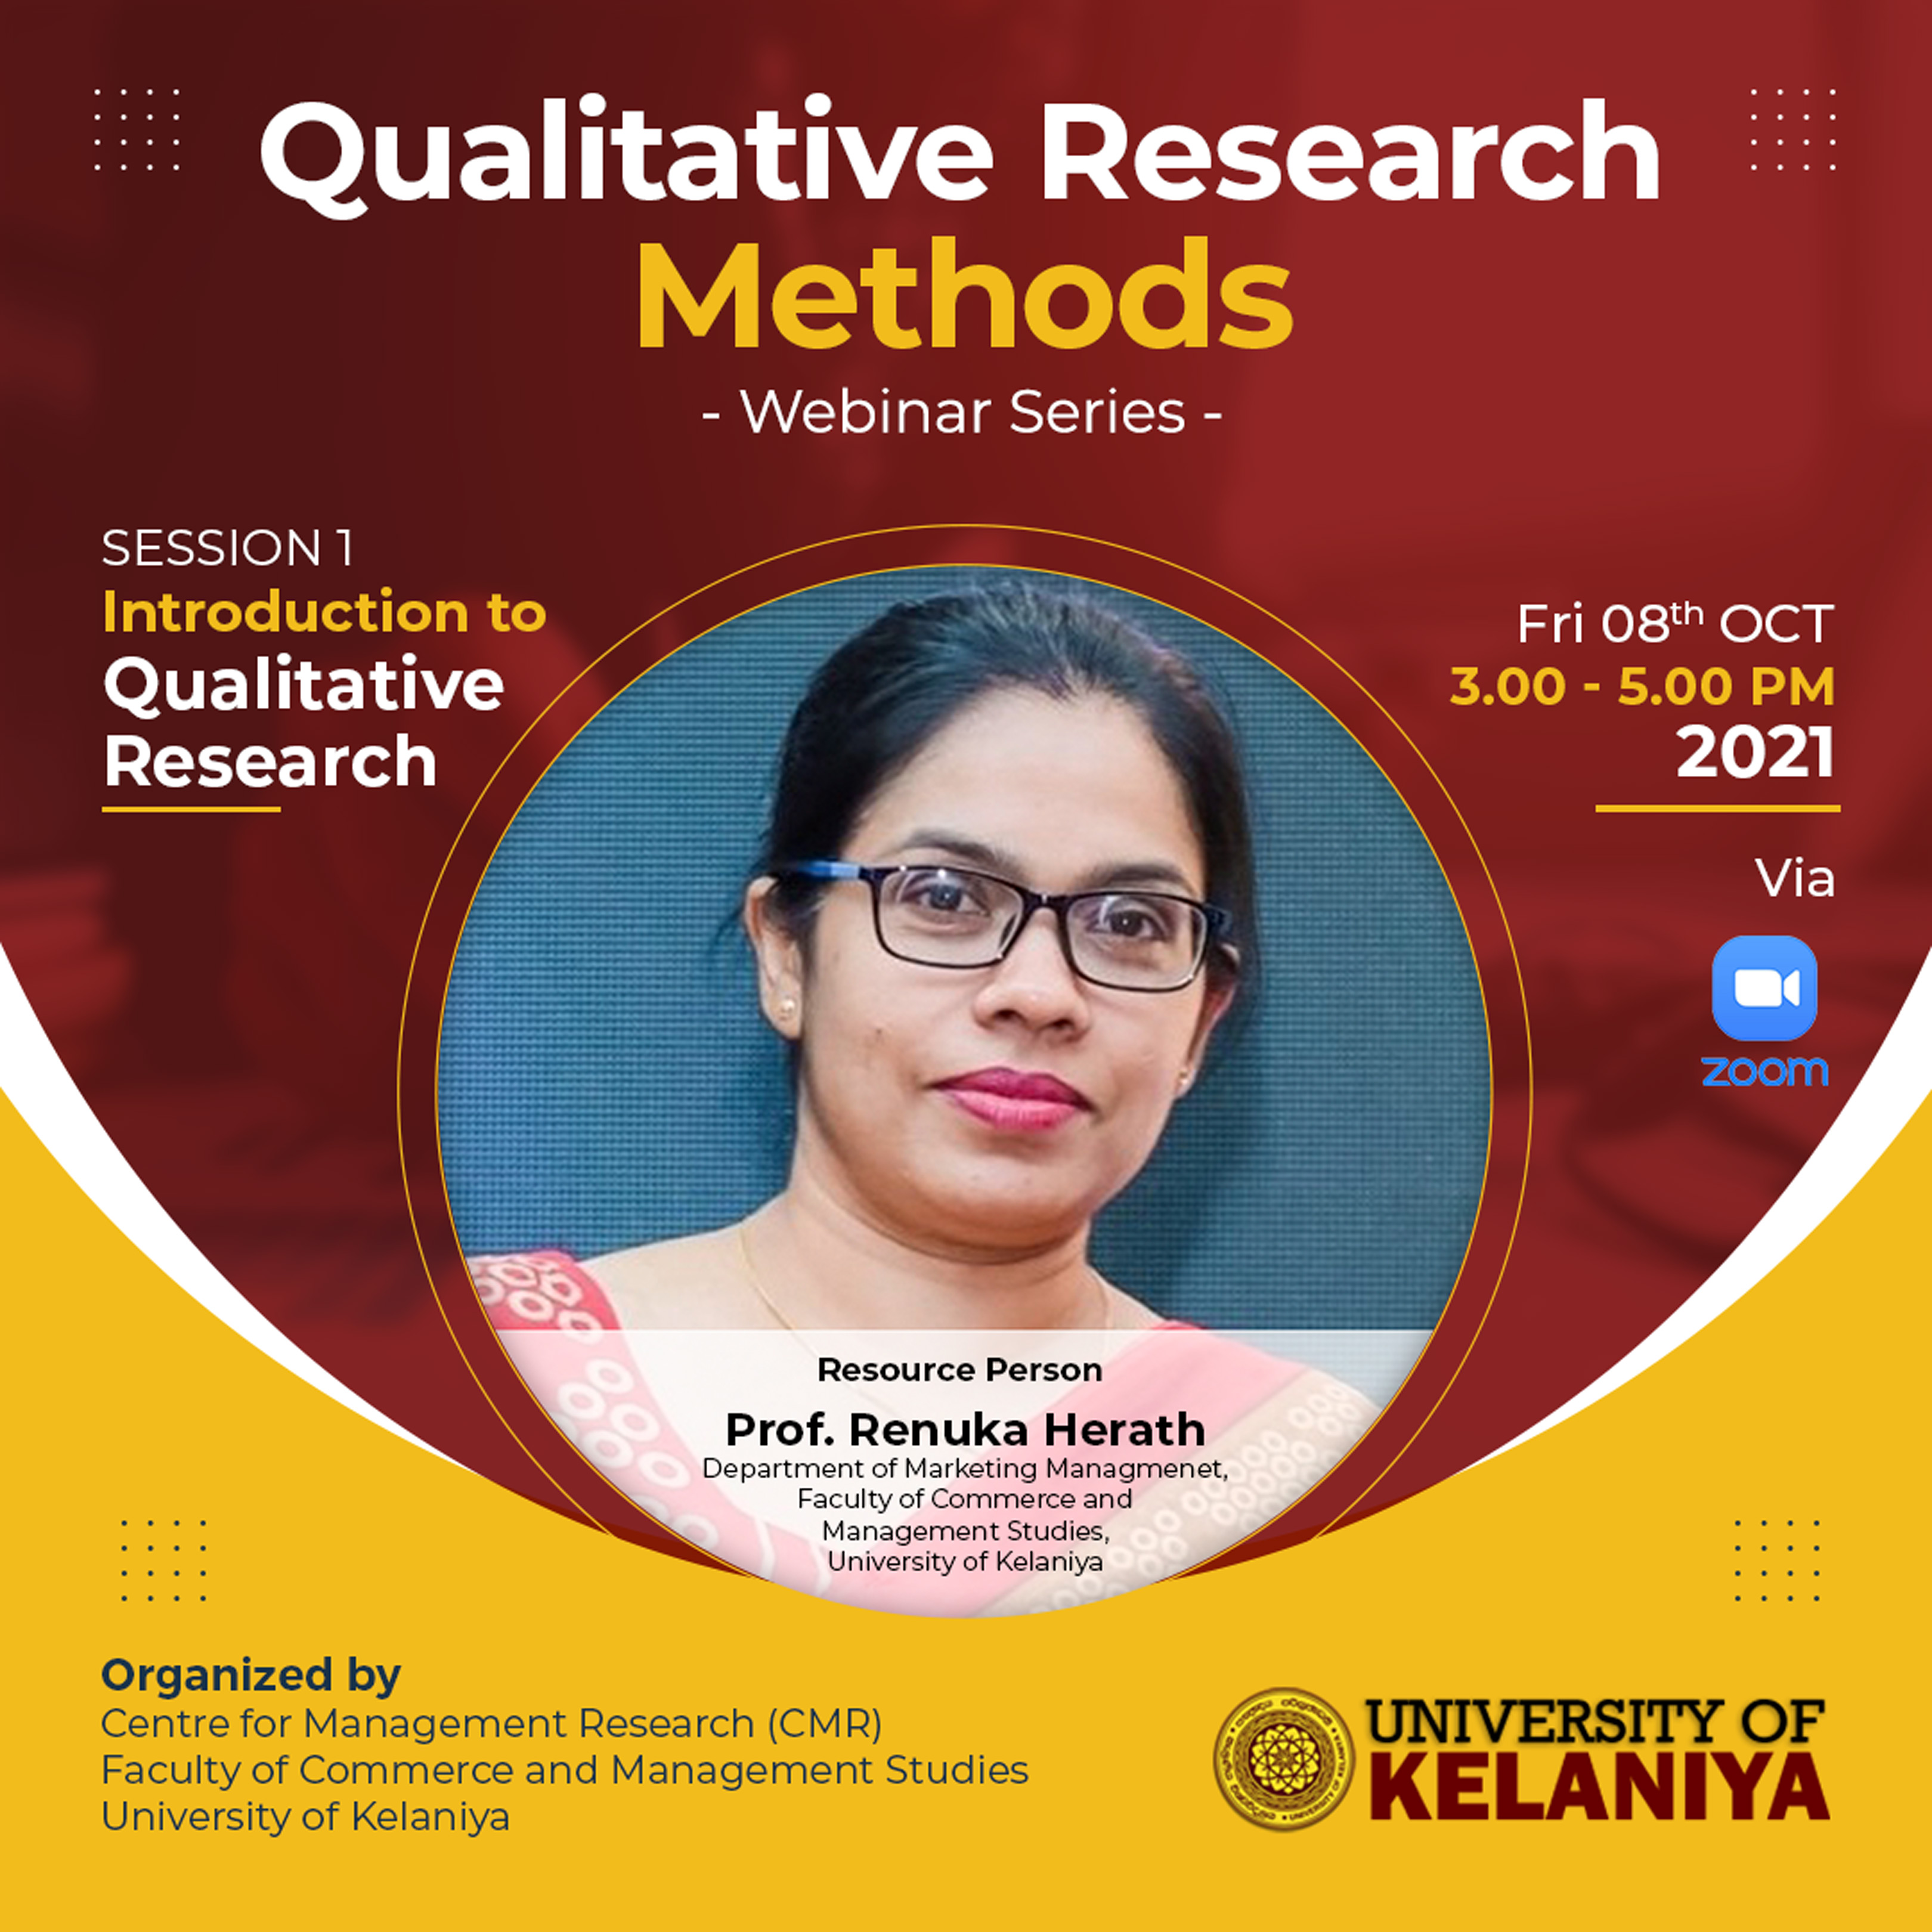 Qualitative Research Methods - Session 1